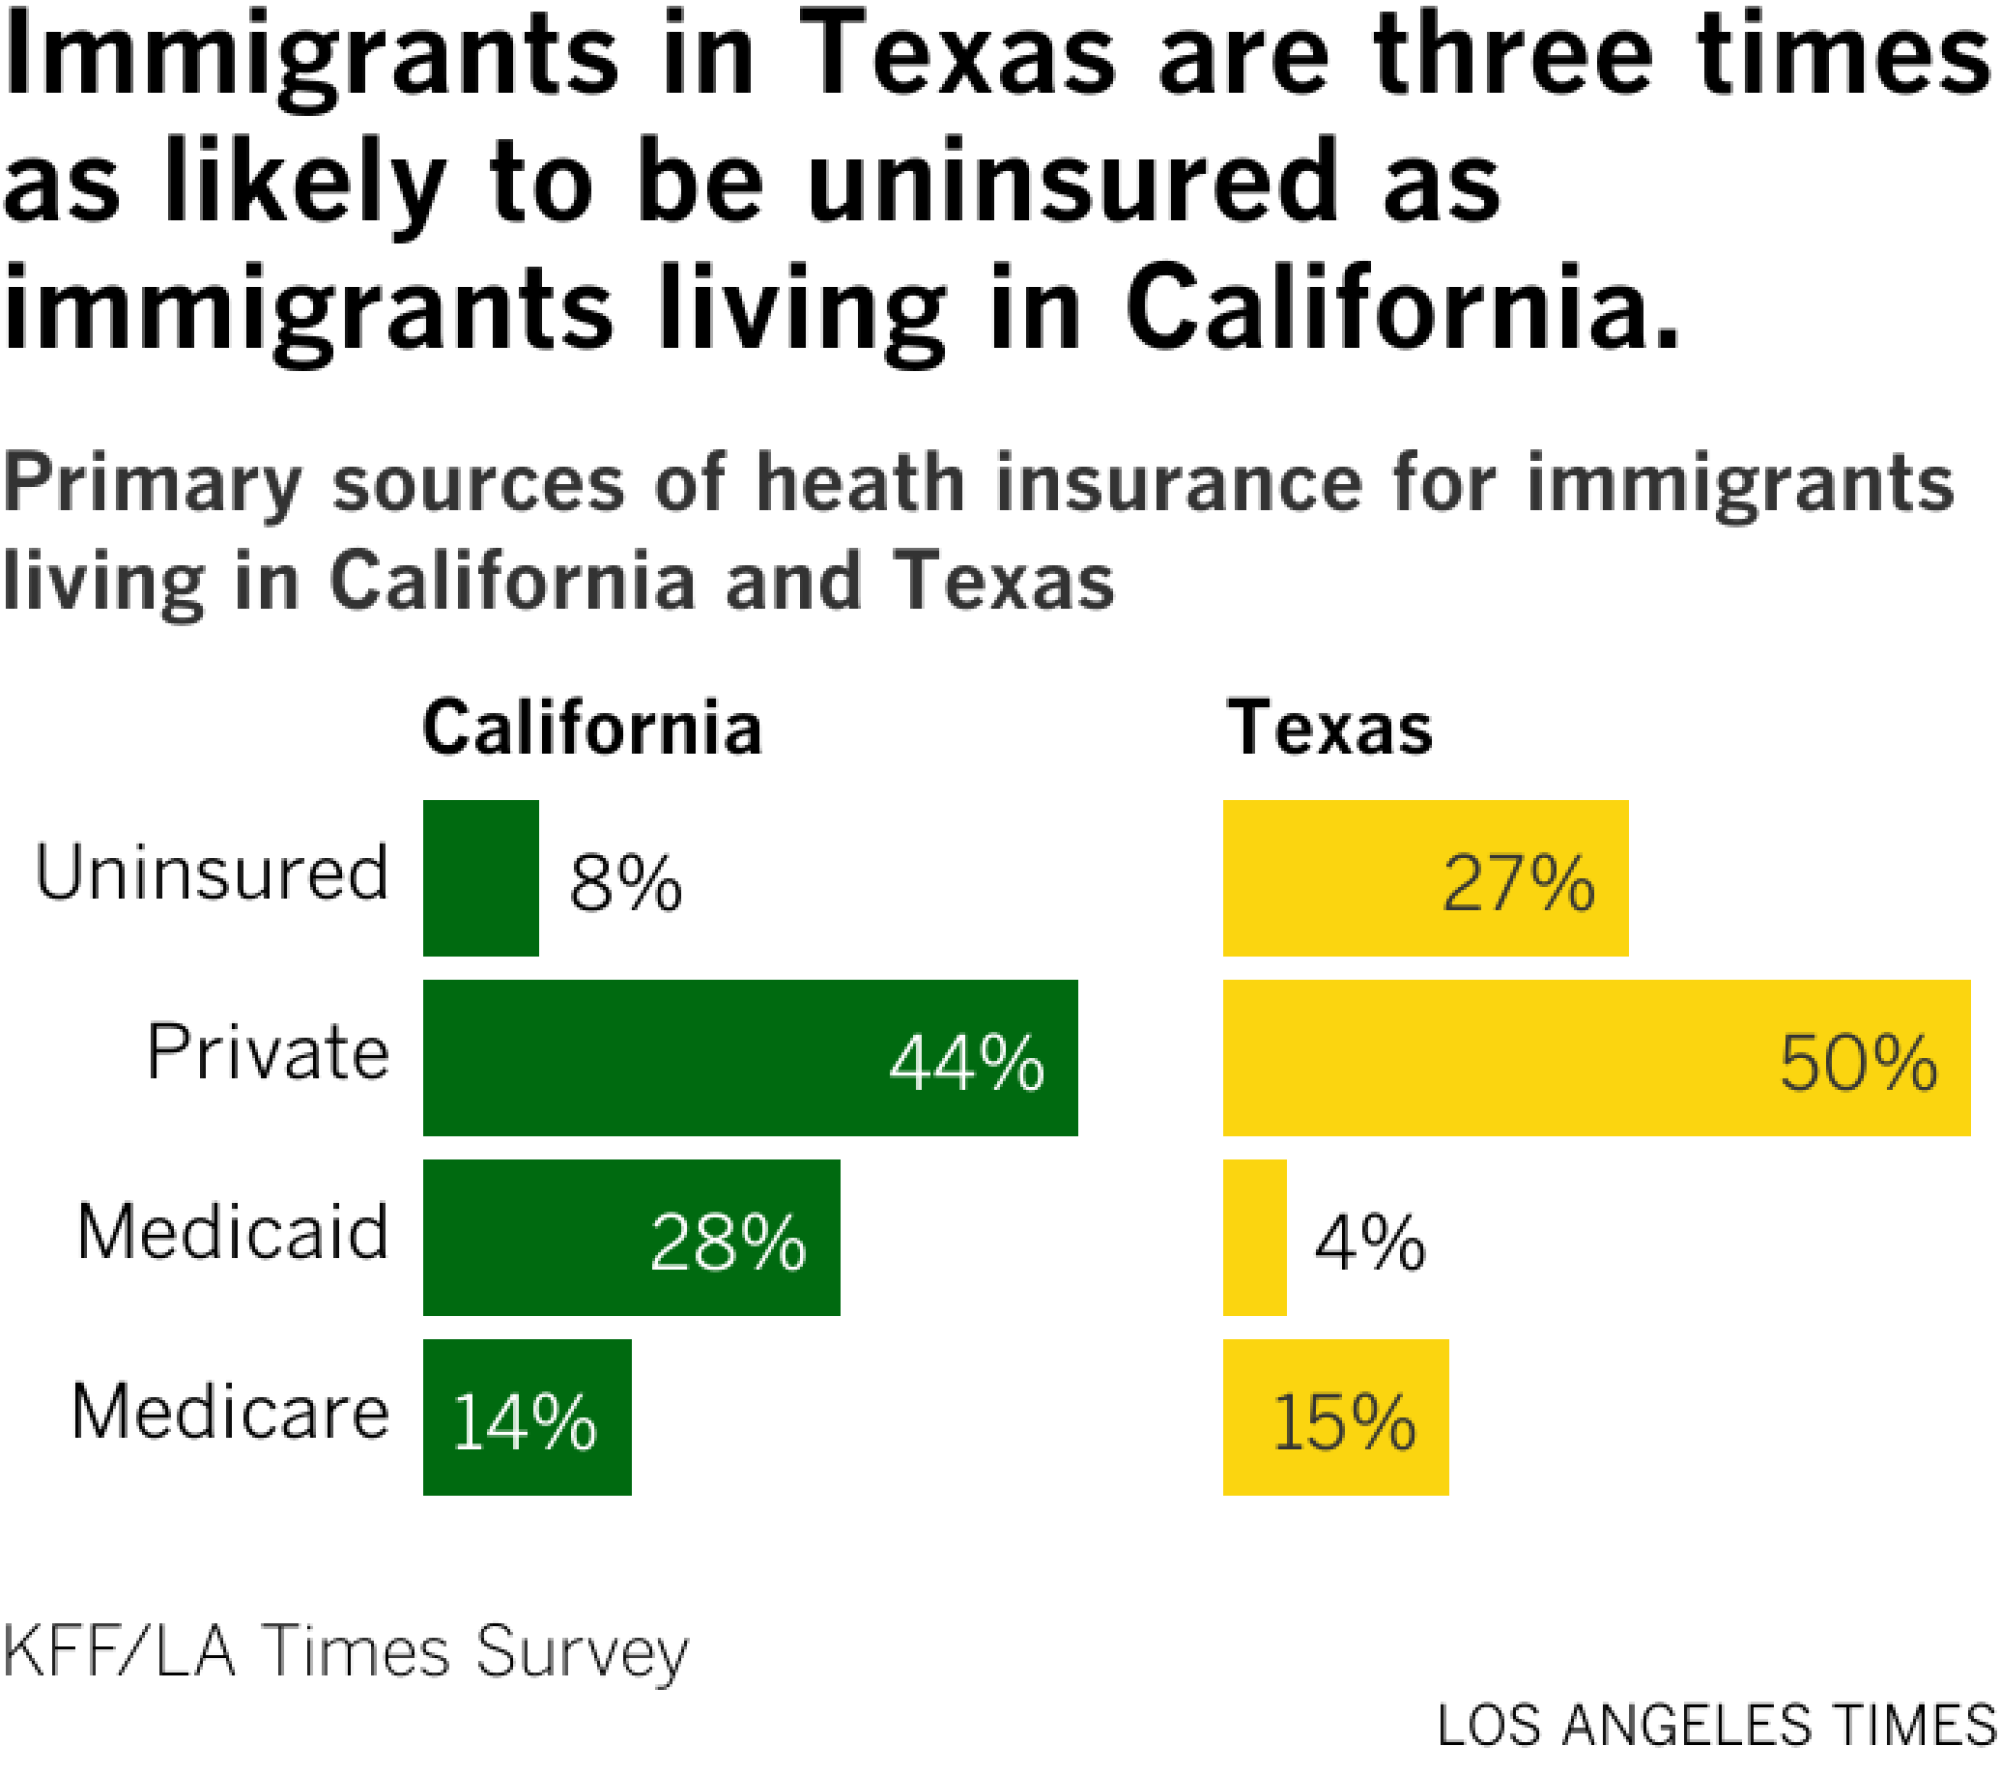 Immigrants in Texas are three times as likely to be uninsured as immigrants living in California. 